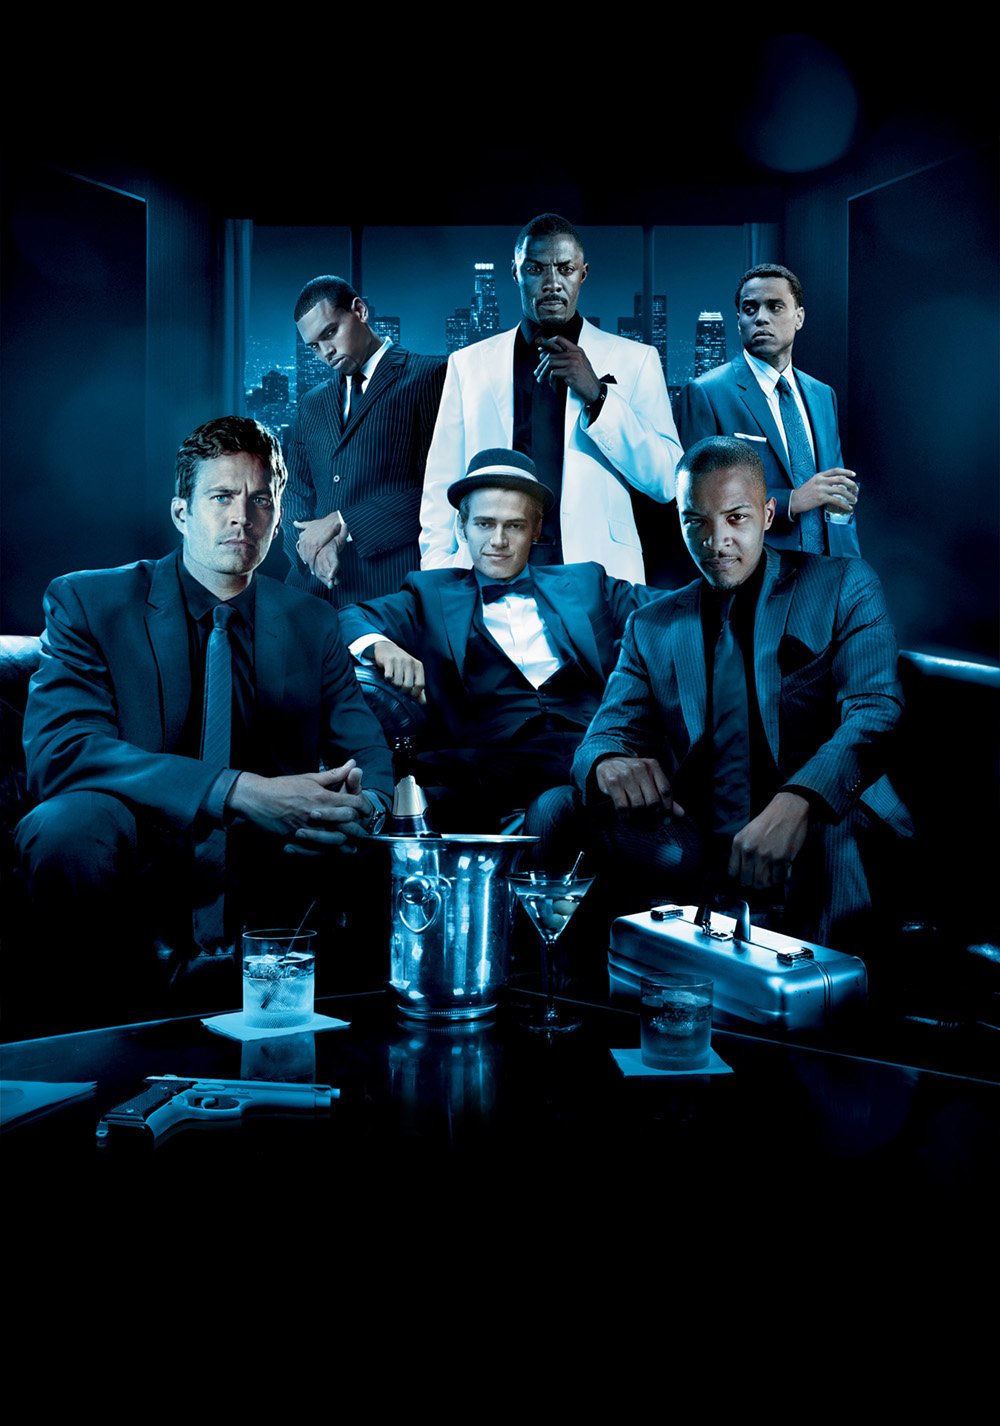 takers movie download